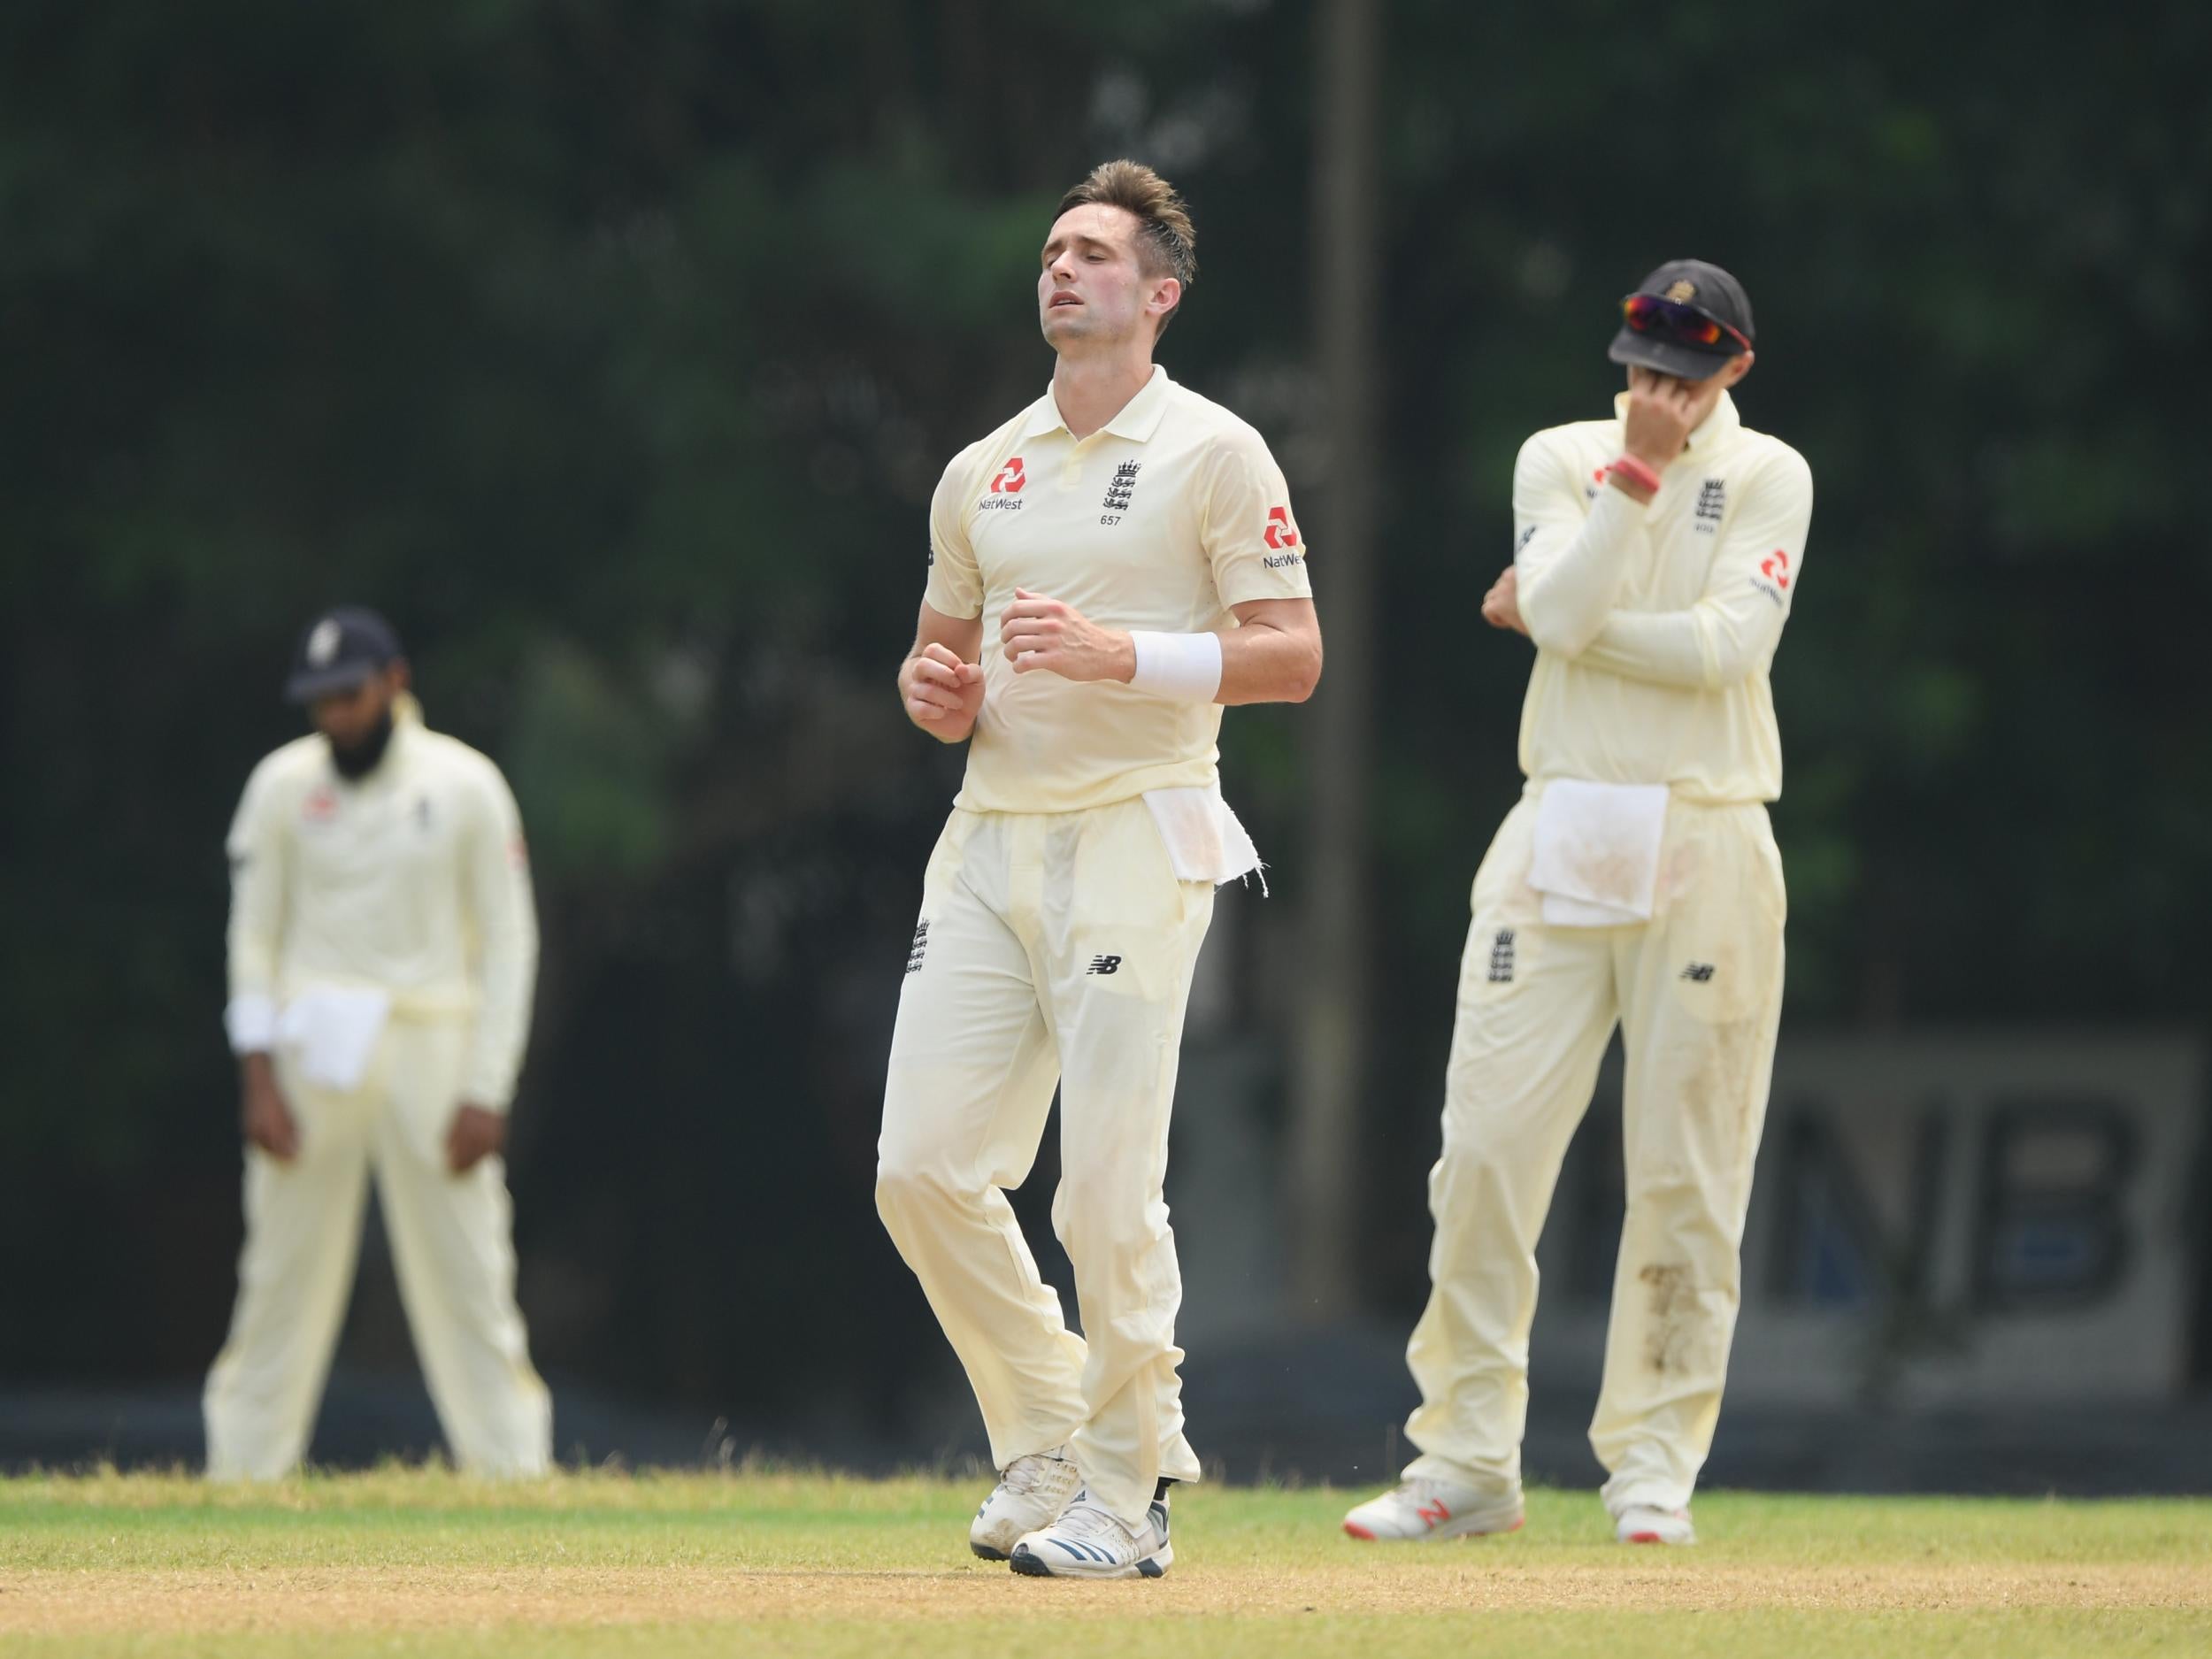 England's bowlers were frustrated against Sri Lanka